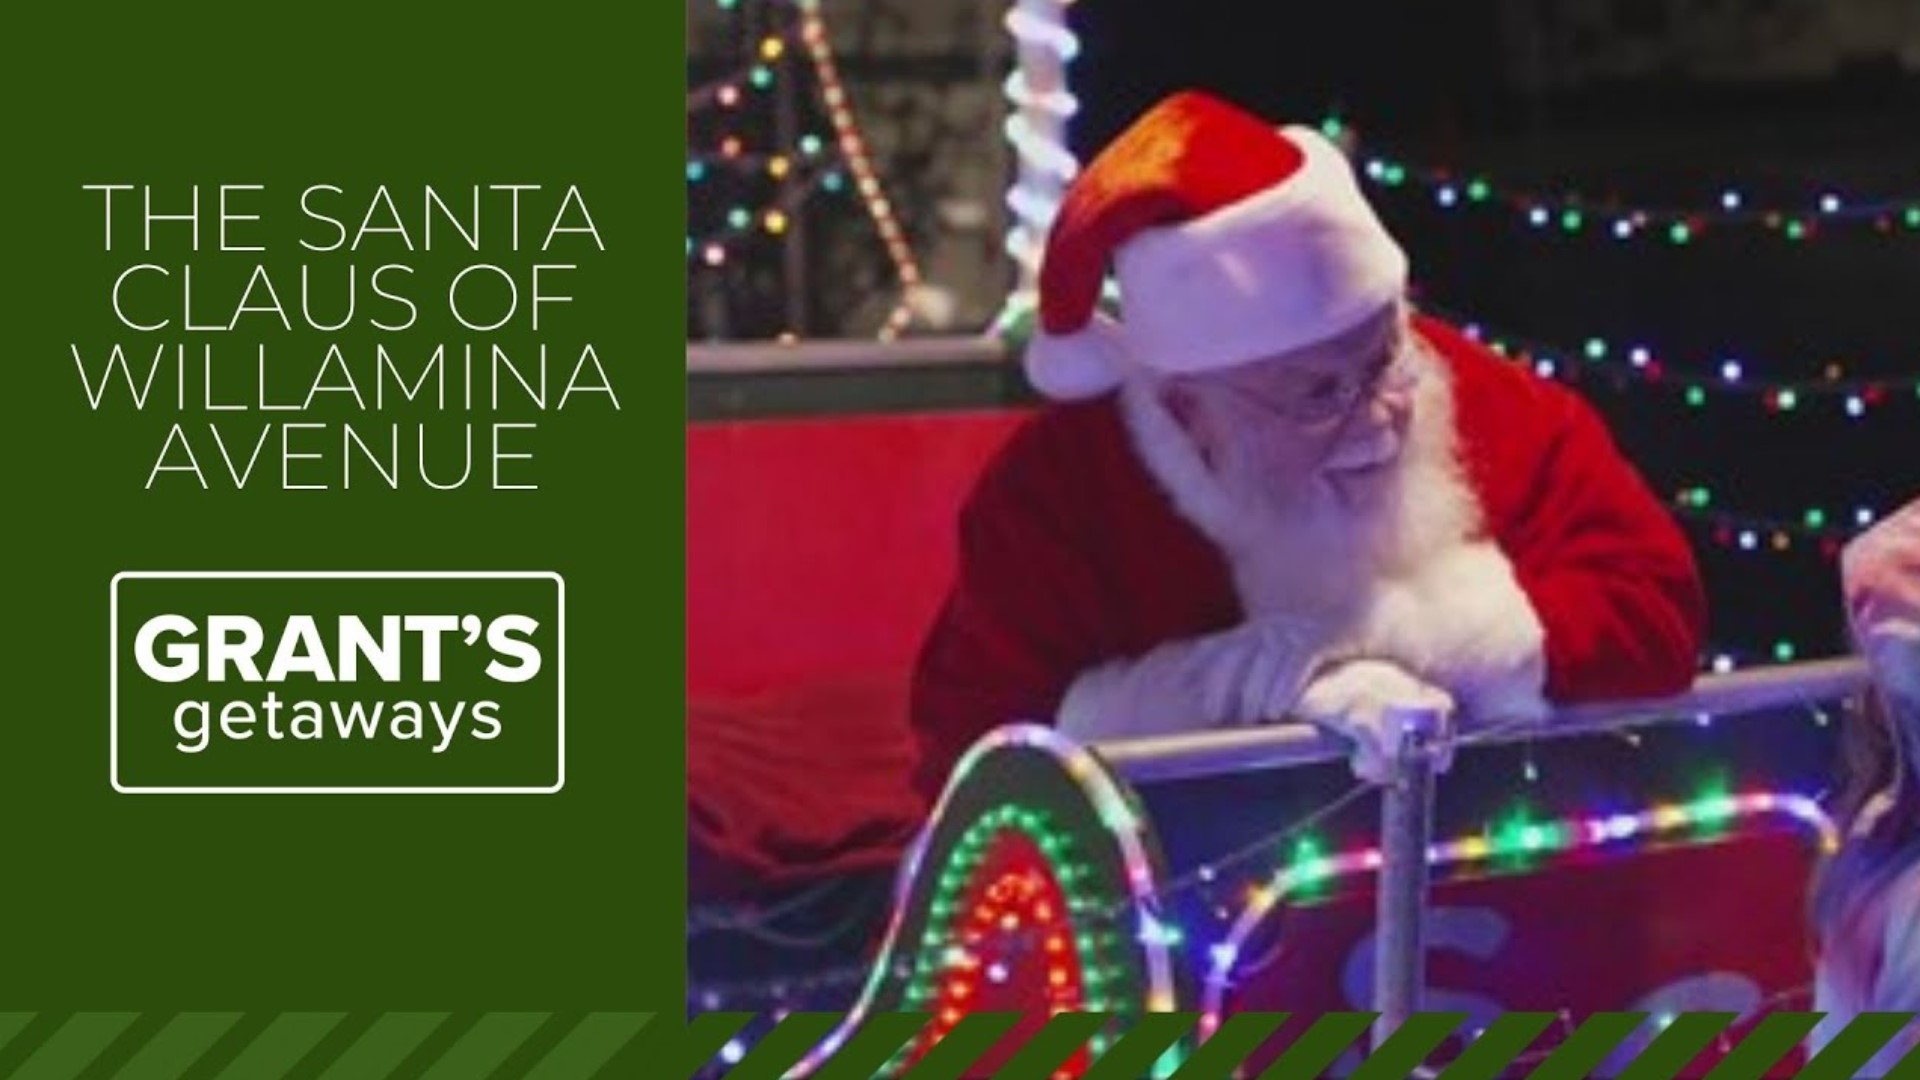 Special Alert: Santa's on His Sleigh and Heading Our Way! Get